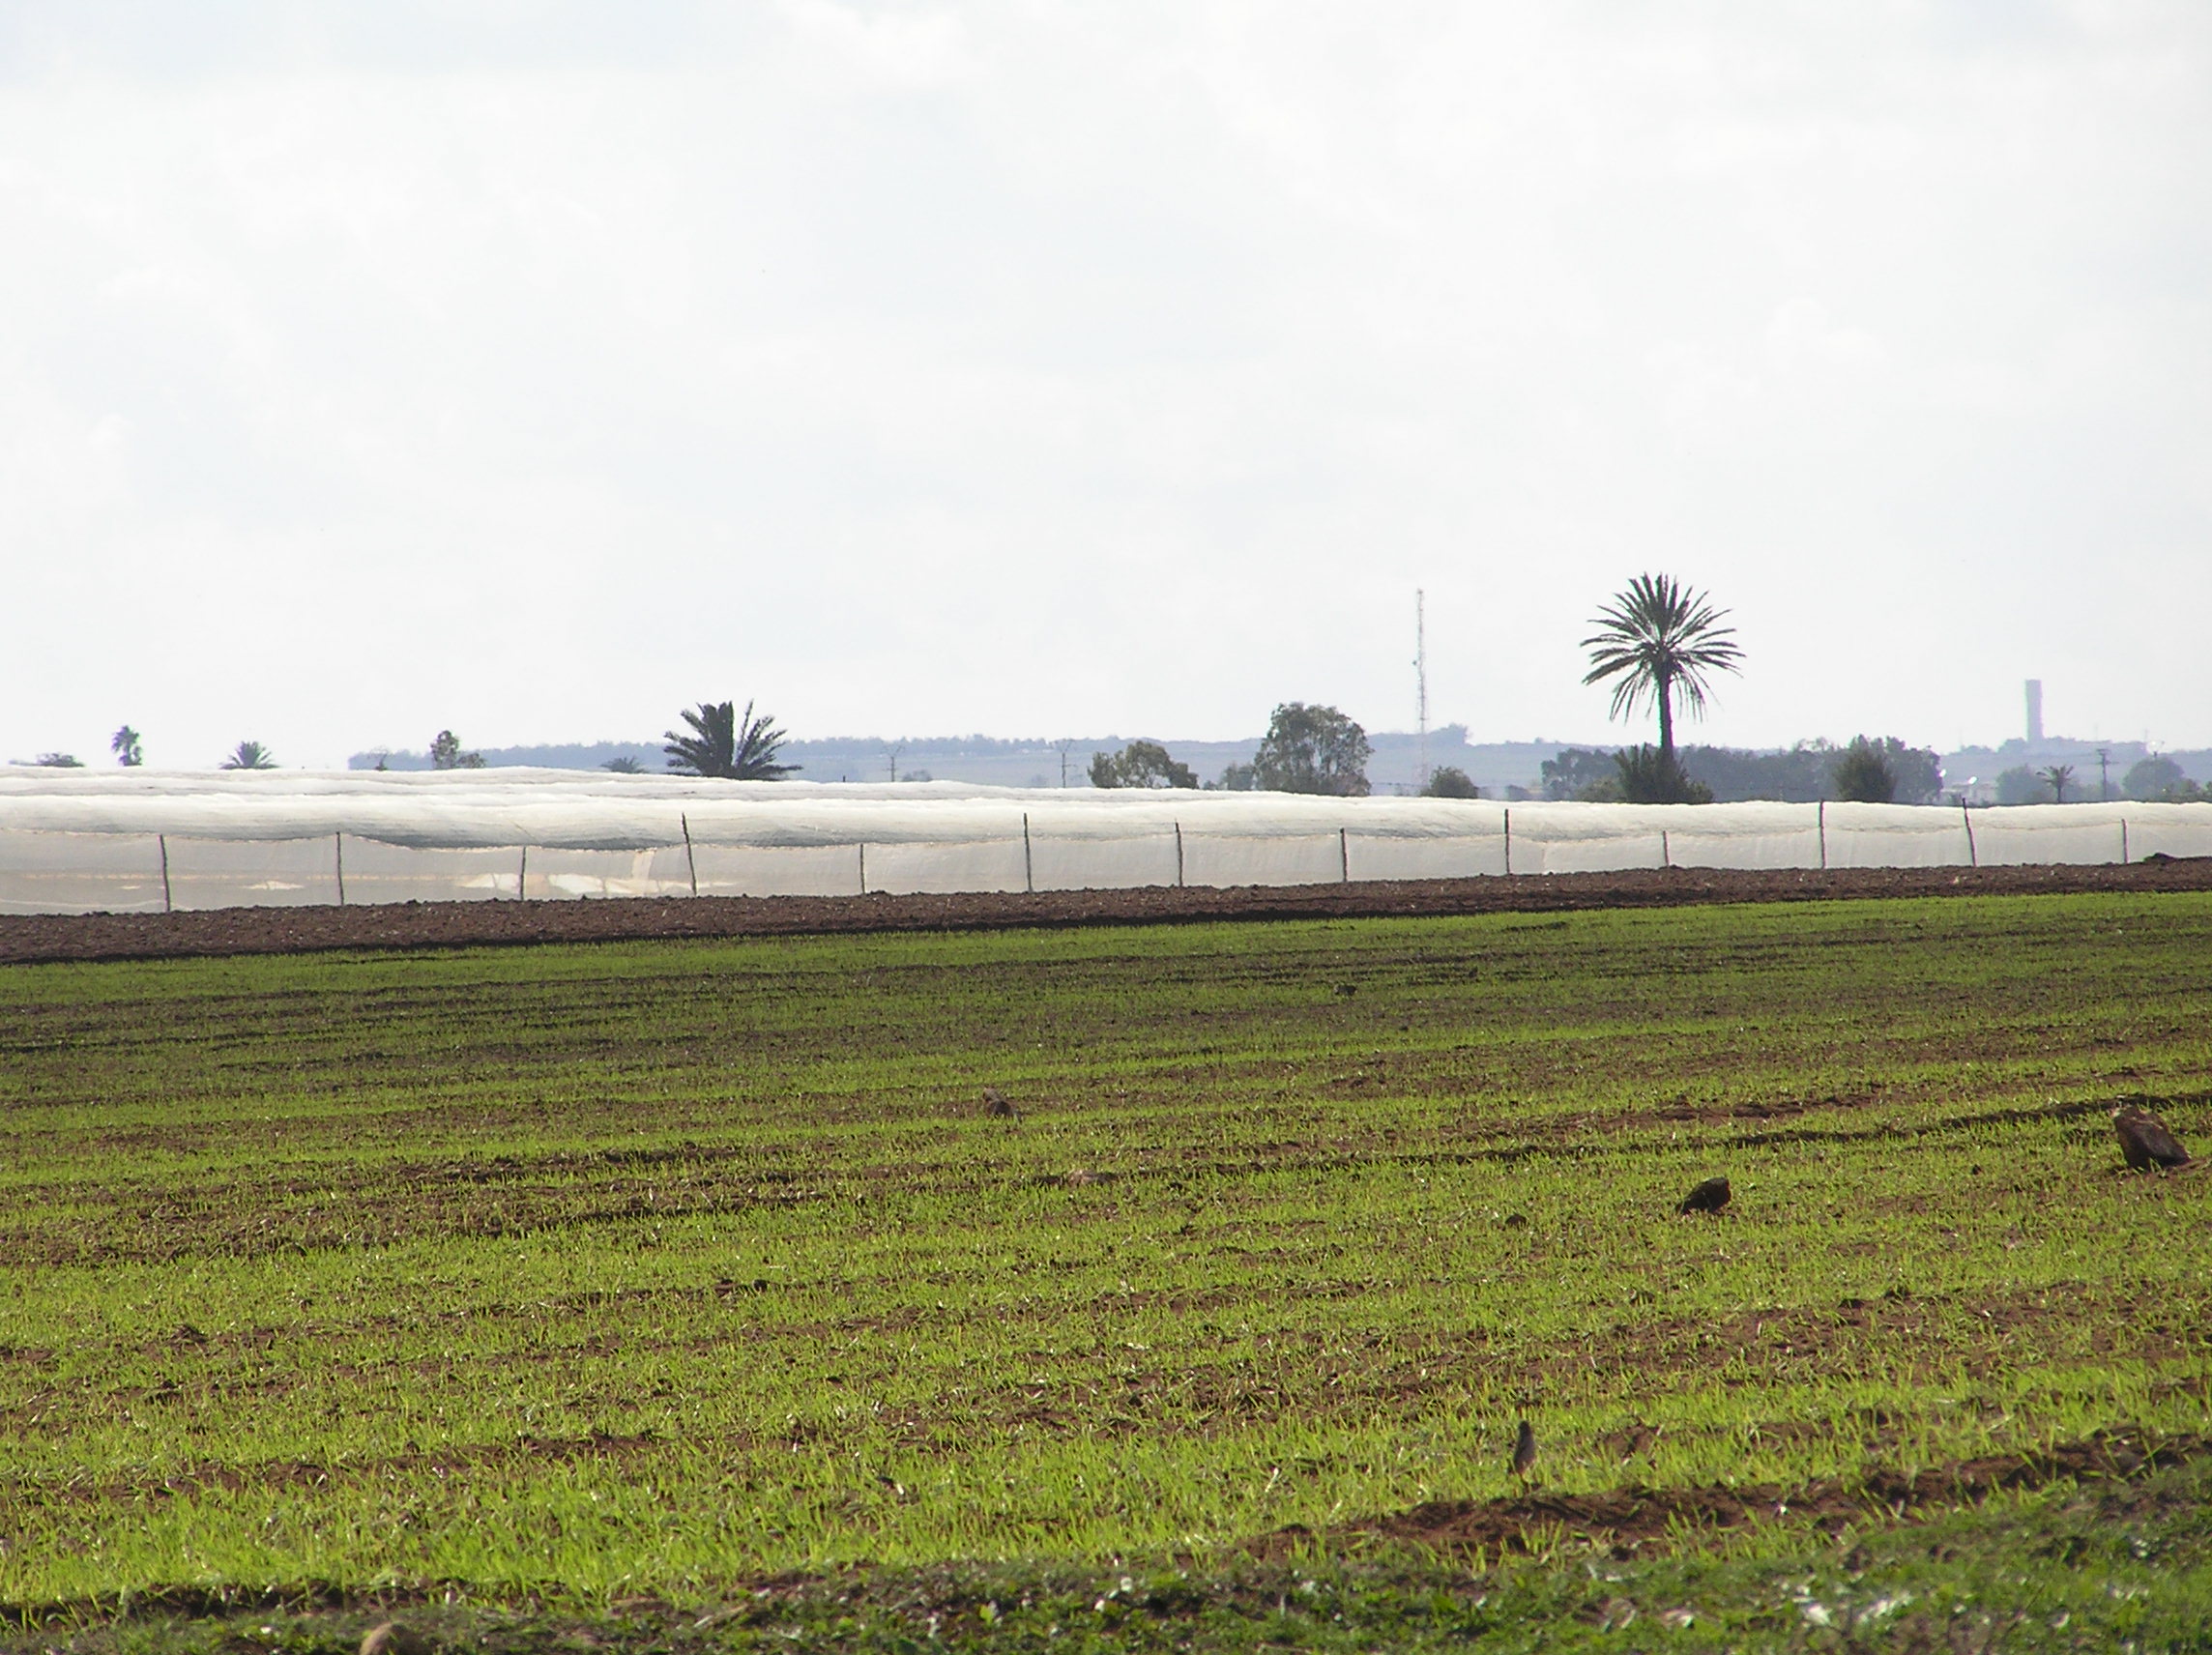 Example for Agriculture in the region of Casablanca